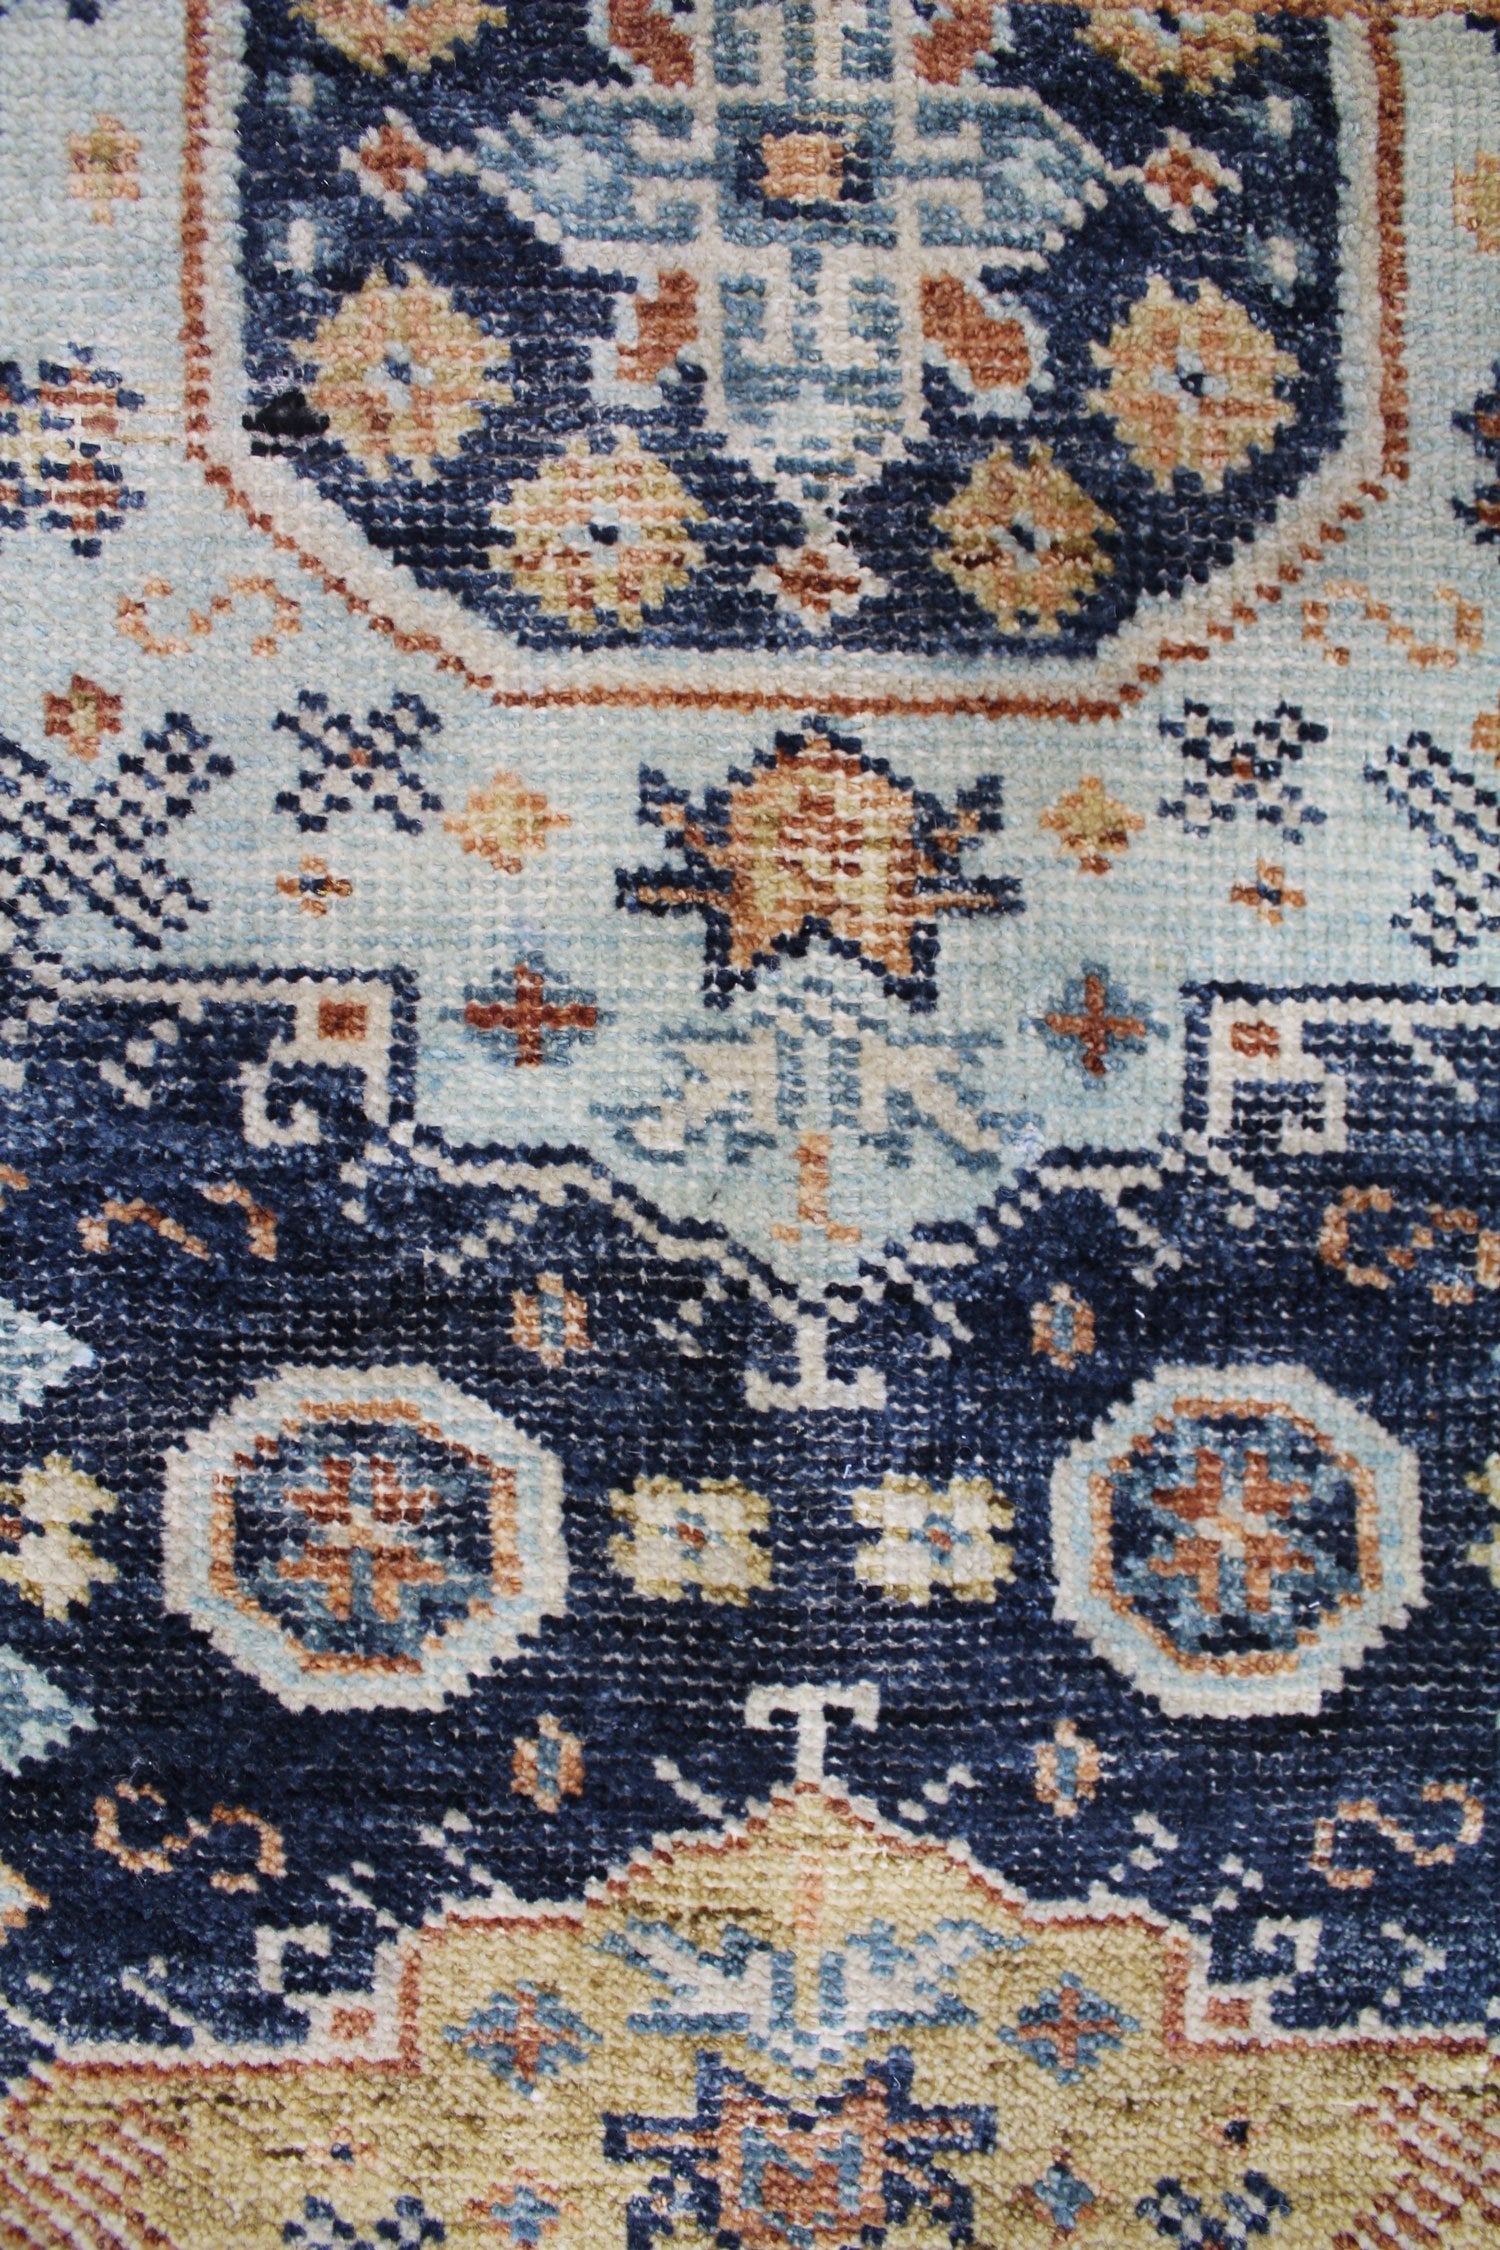 Vecce Handwoven Transitional Rug, J62762